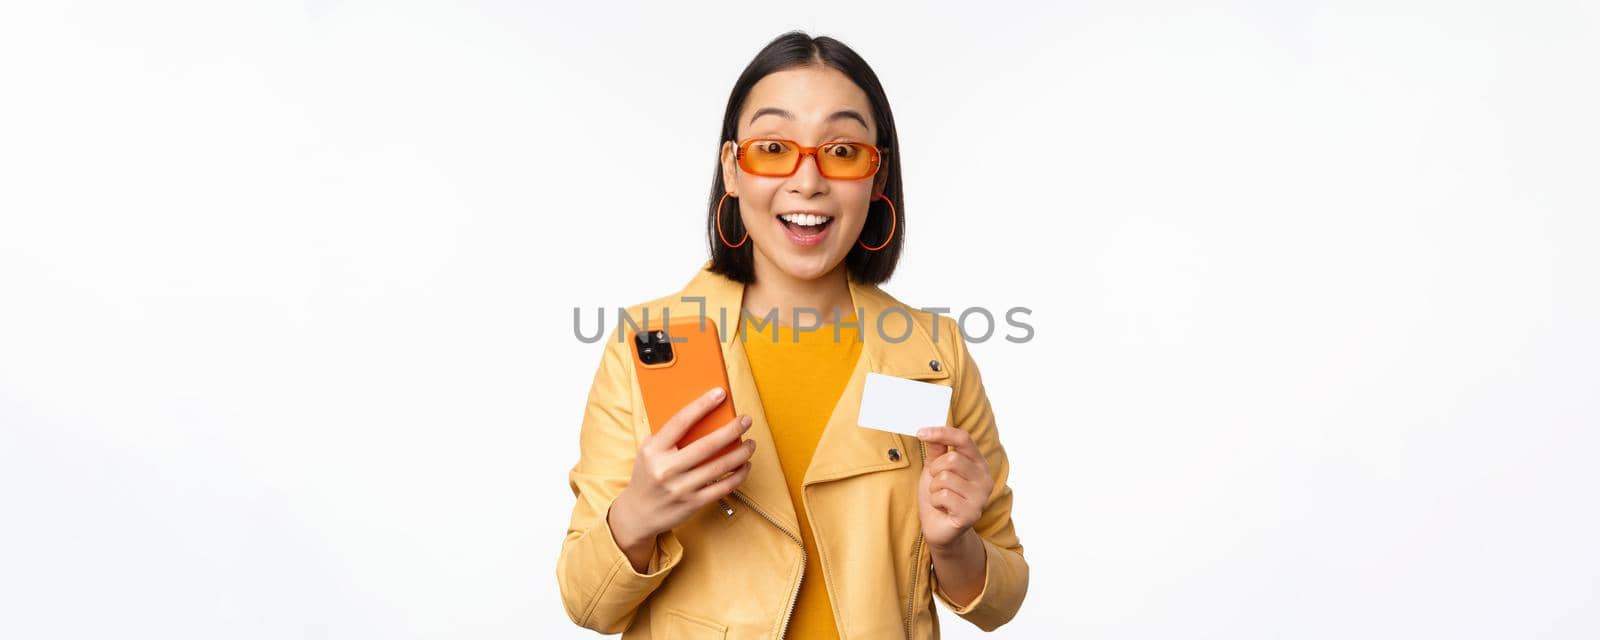 Online shopping. Stylish asian female model in sunglasses, holding credit card and mobile phone, smiling happy, standing over white background. Copy space